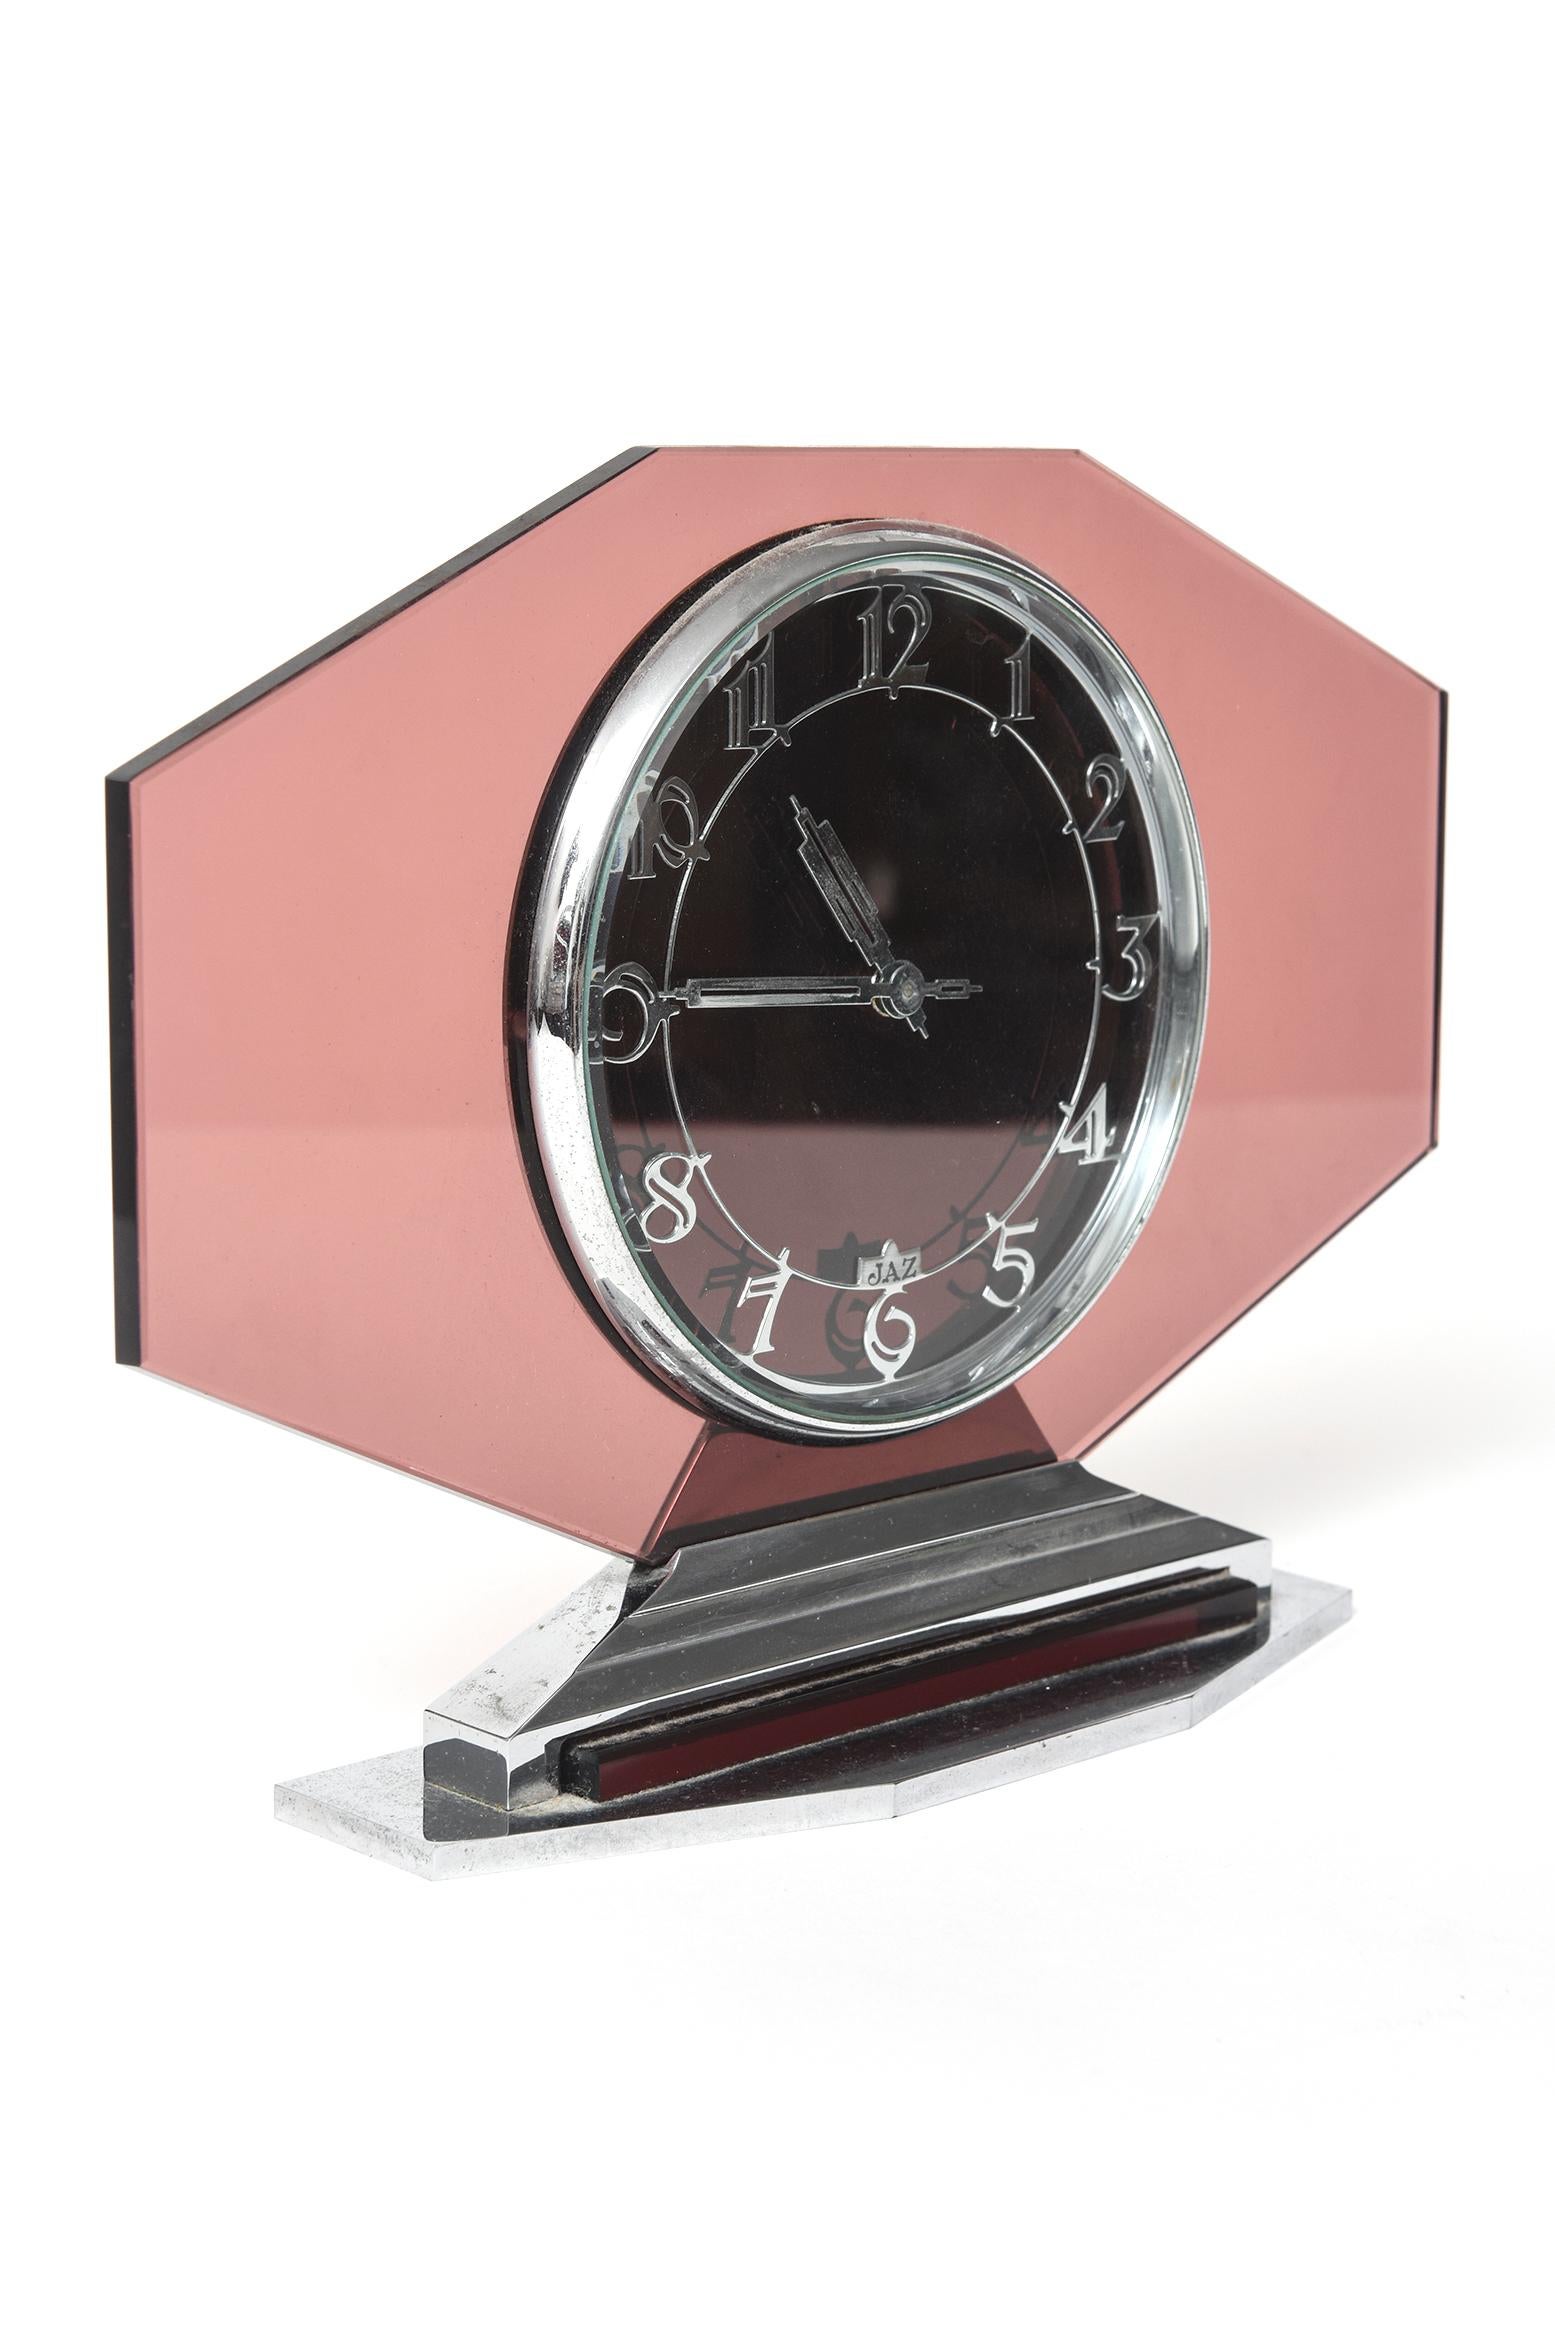 Art Deco French Pink Glass Clock Original 1930's 8-Day by Jaz In Good Condition For Sale In Miami Beach, FL